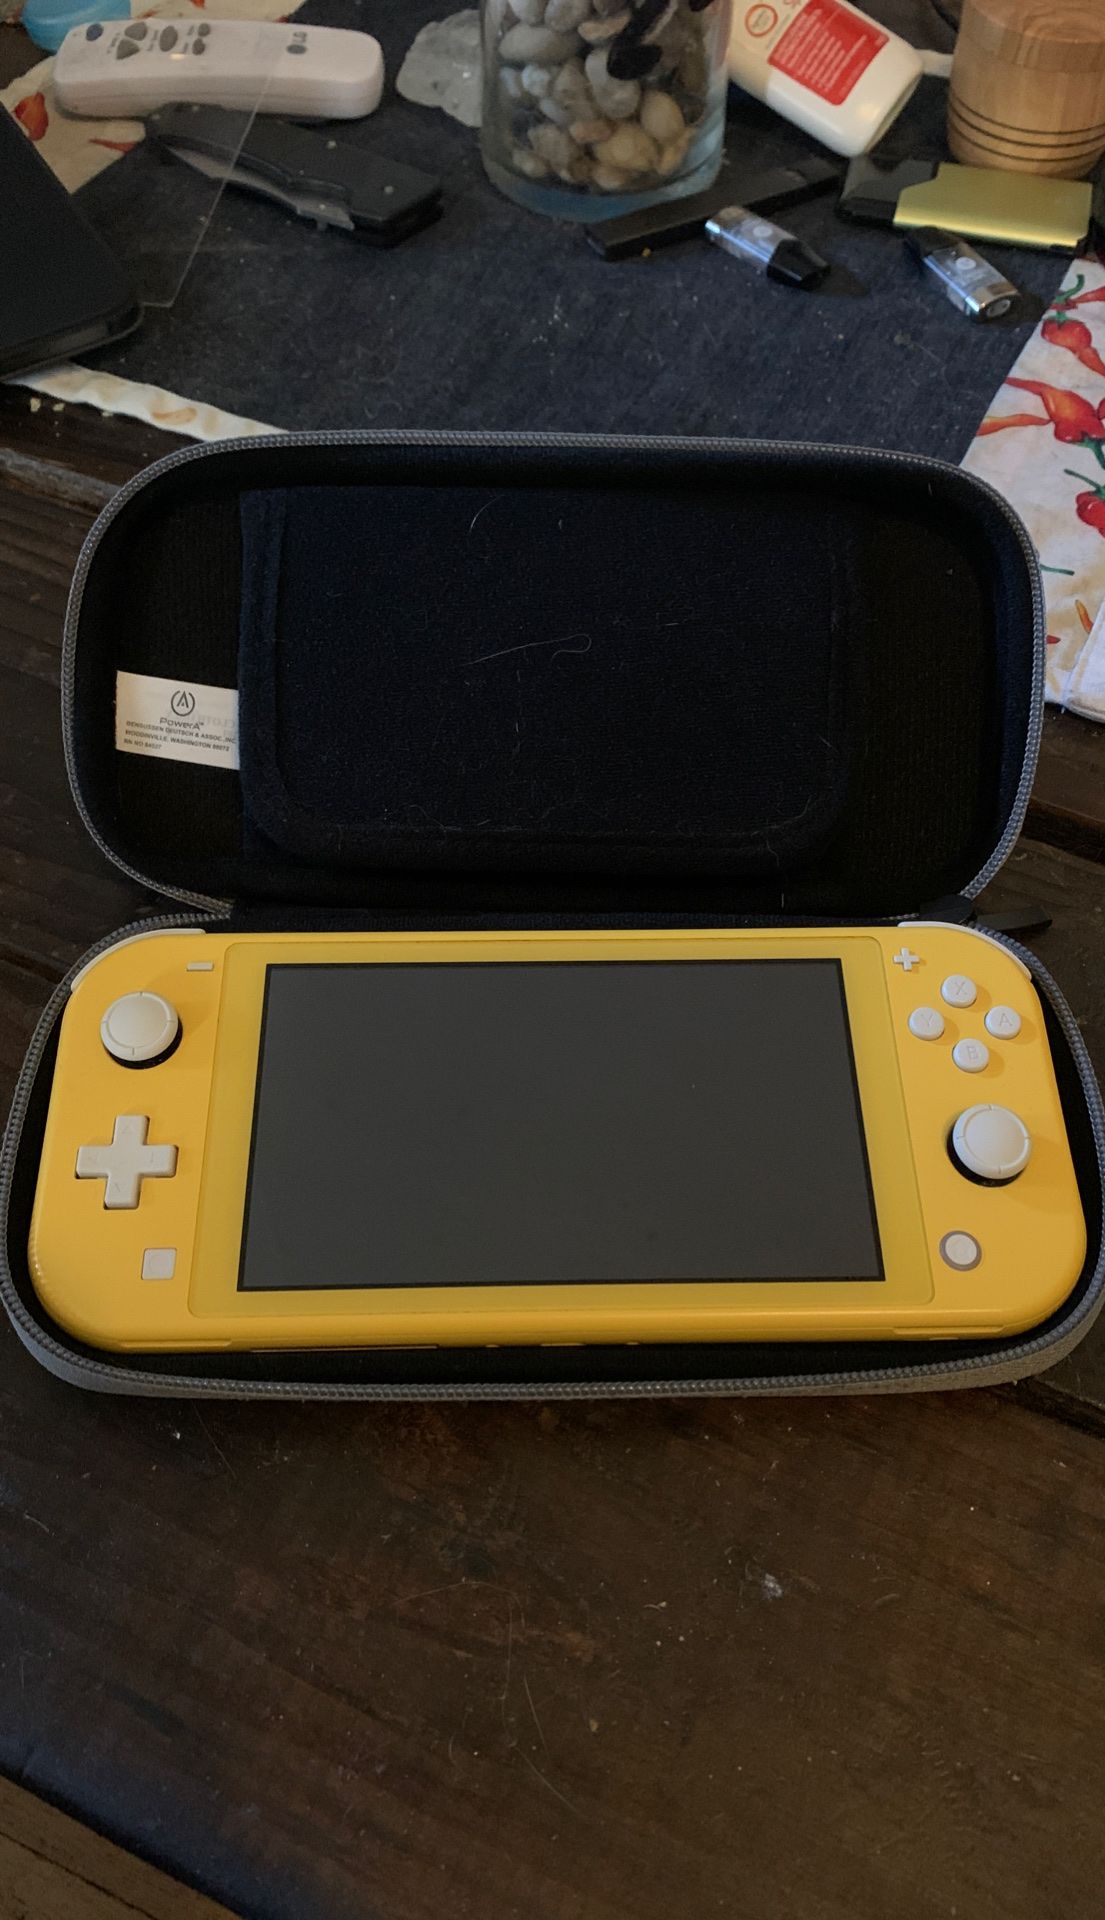 Nintendo Switch Lite - Yellow - Charging stand included